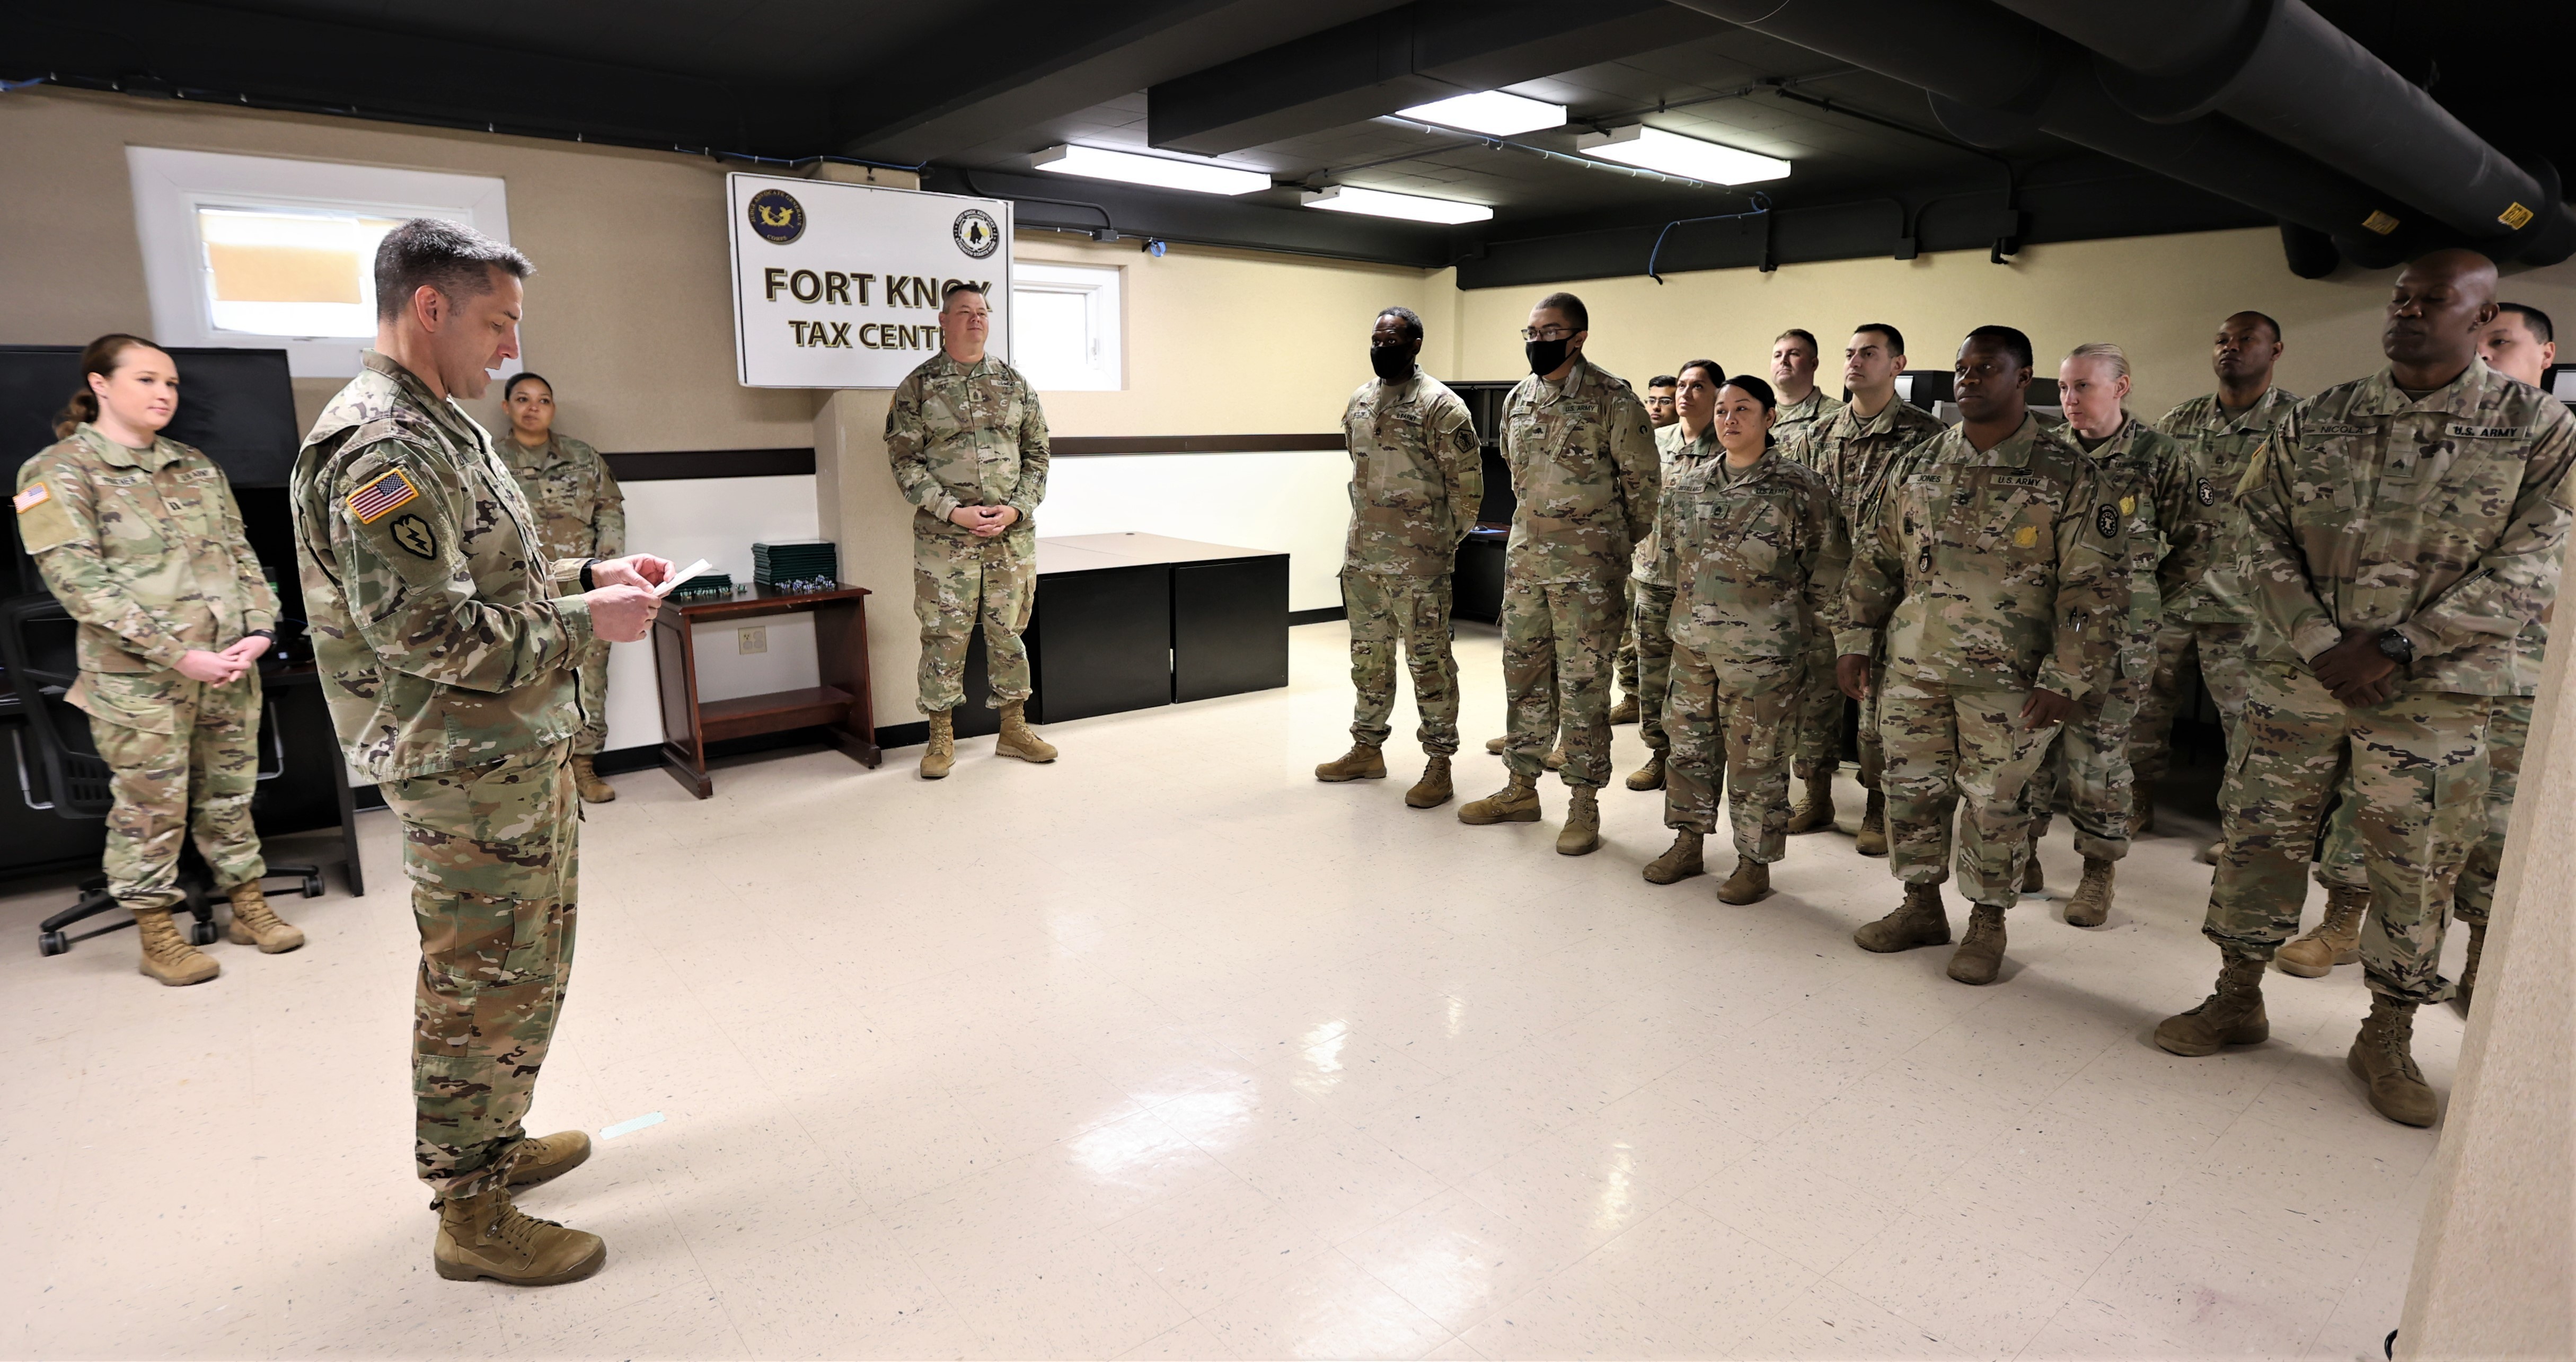 Fort Knox Tax Center team honored at closing ceremony following